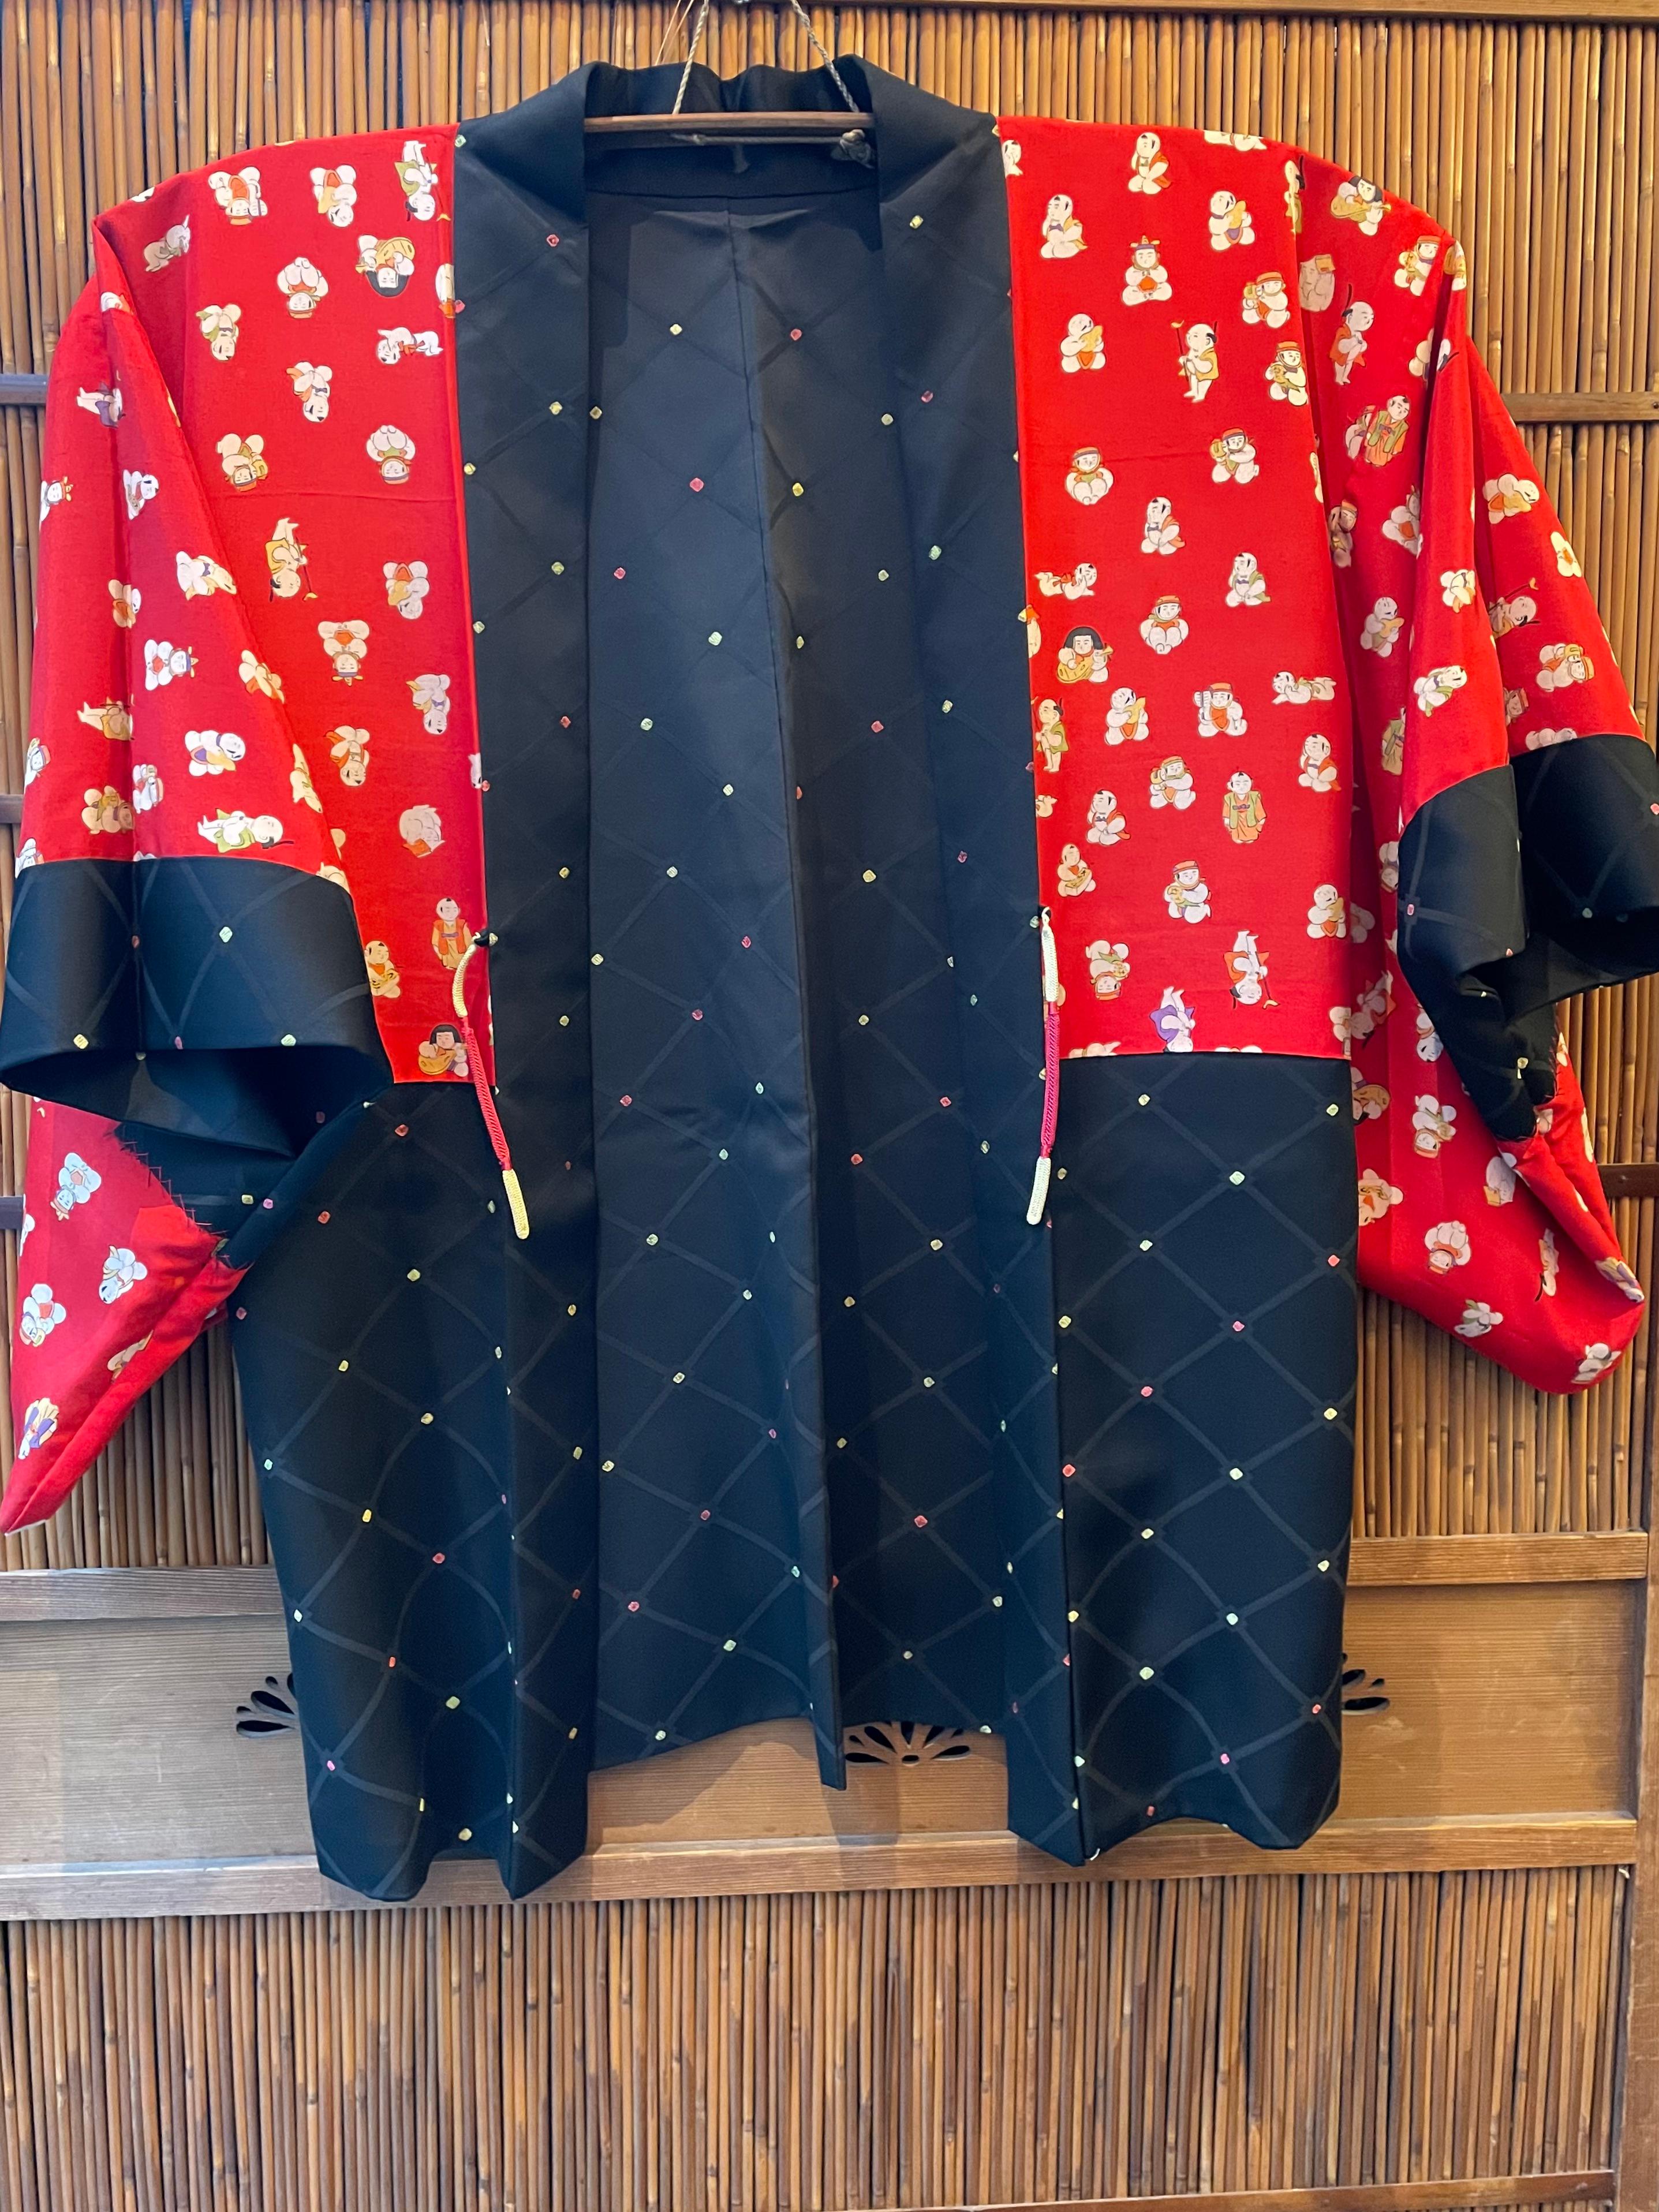 This is a silk jacket which was made in Japan.
It was made in Showa era around 1960s.

The haori is a traditional Japanese hip- or thigh-length jacket worn over a kimono. Resembling a shortened kimono with no overlapping front panels (okumi), the